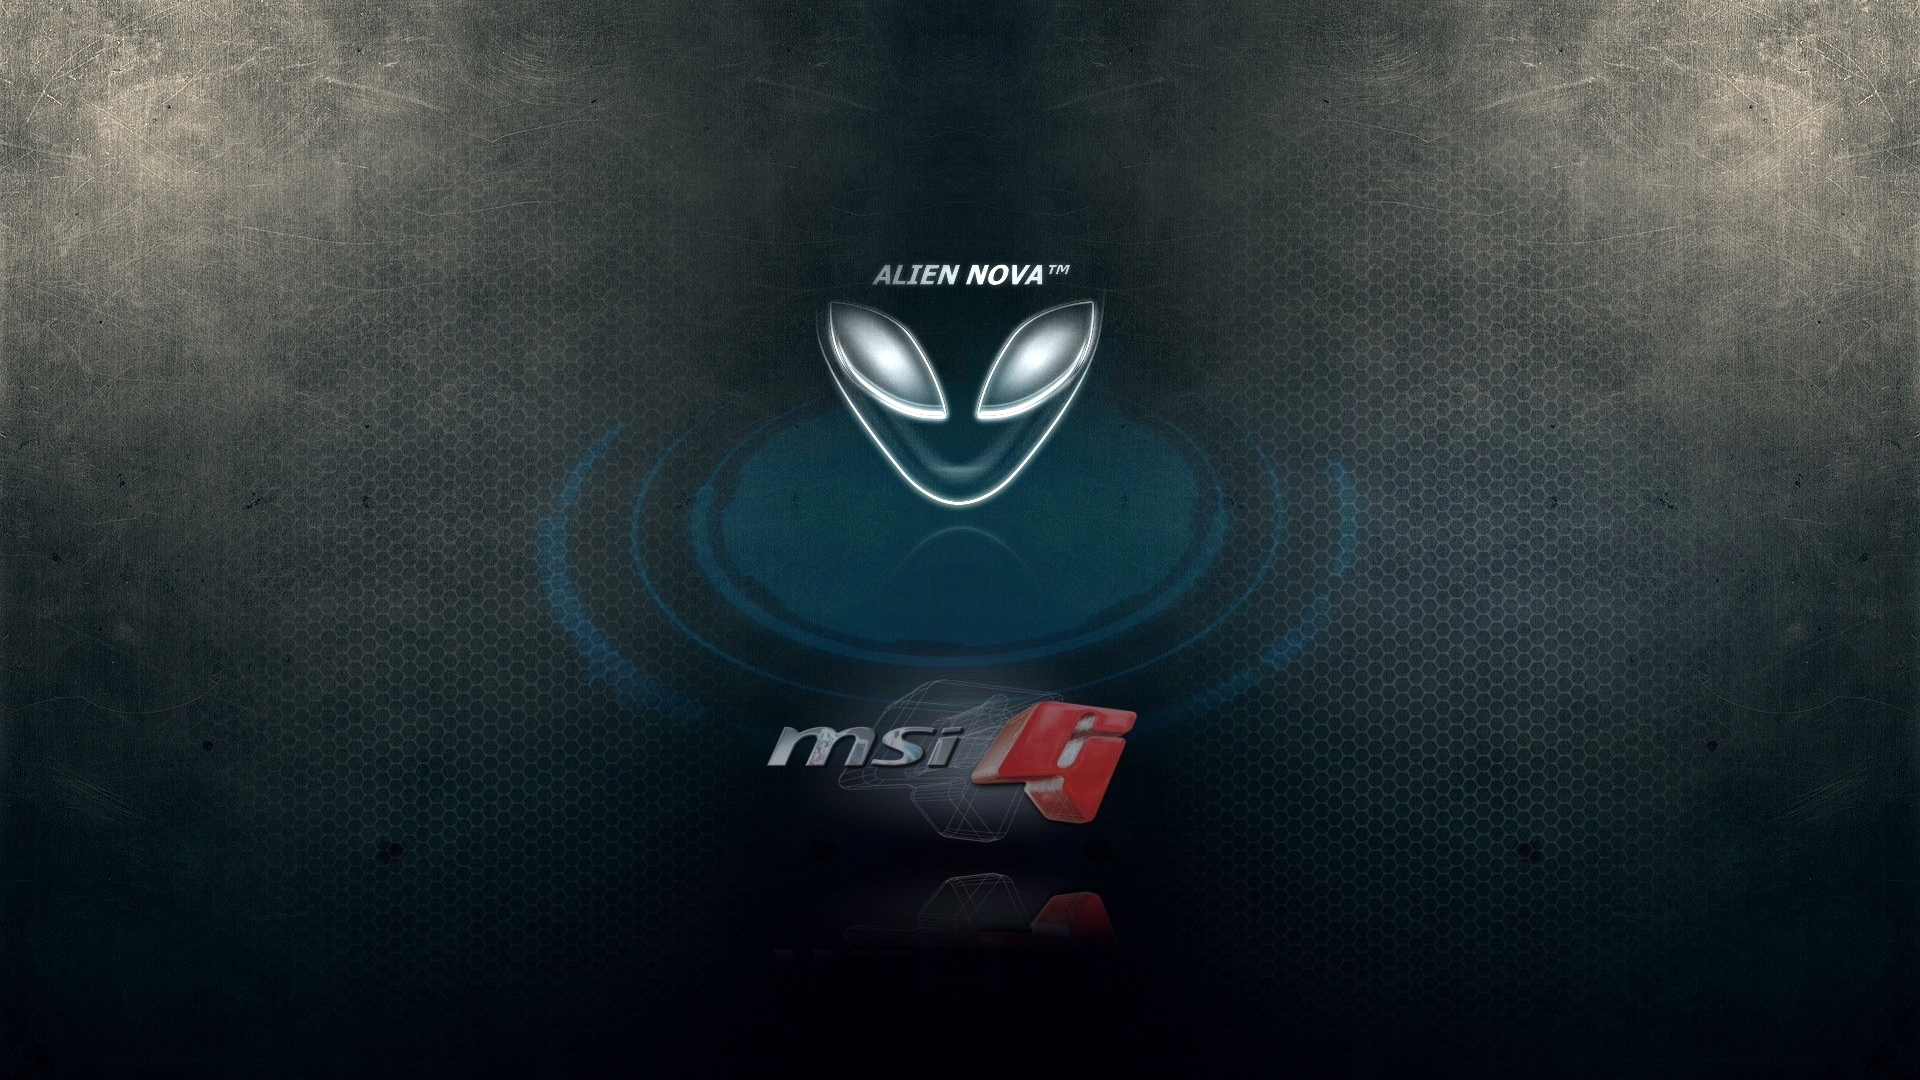 And Msi G Logo HD 1080p Wallpaper Patible For